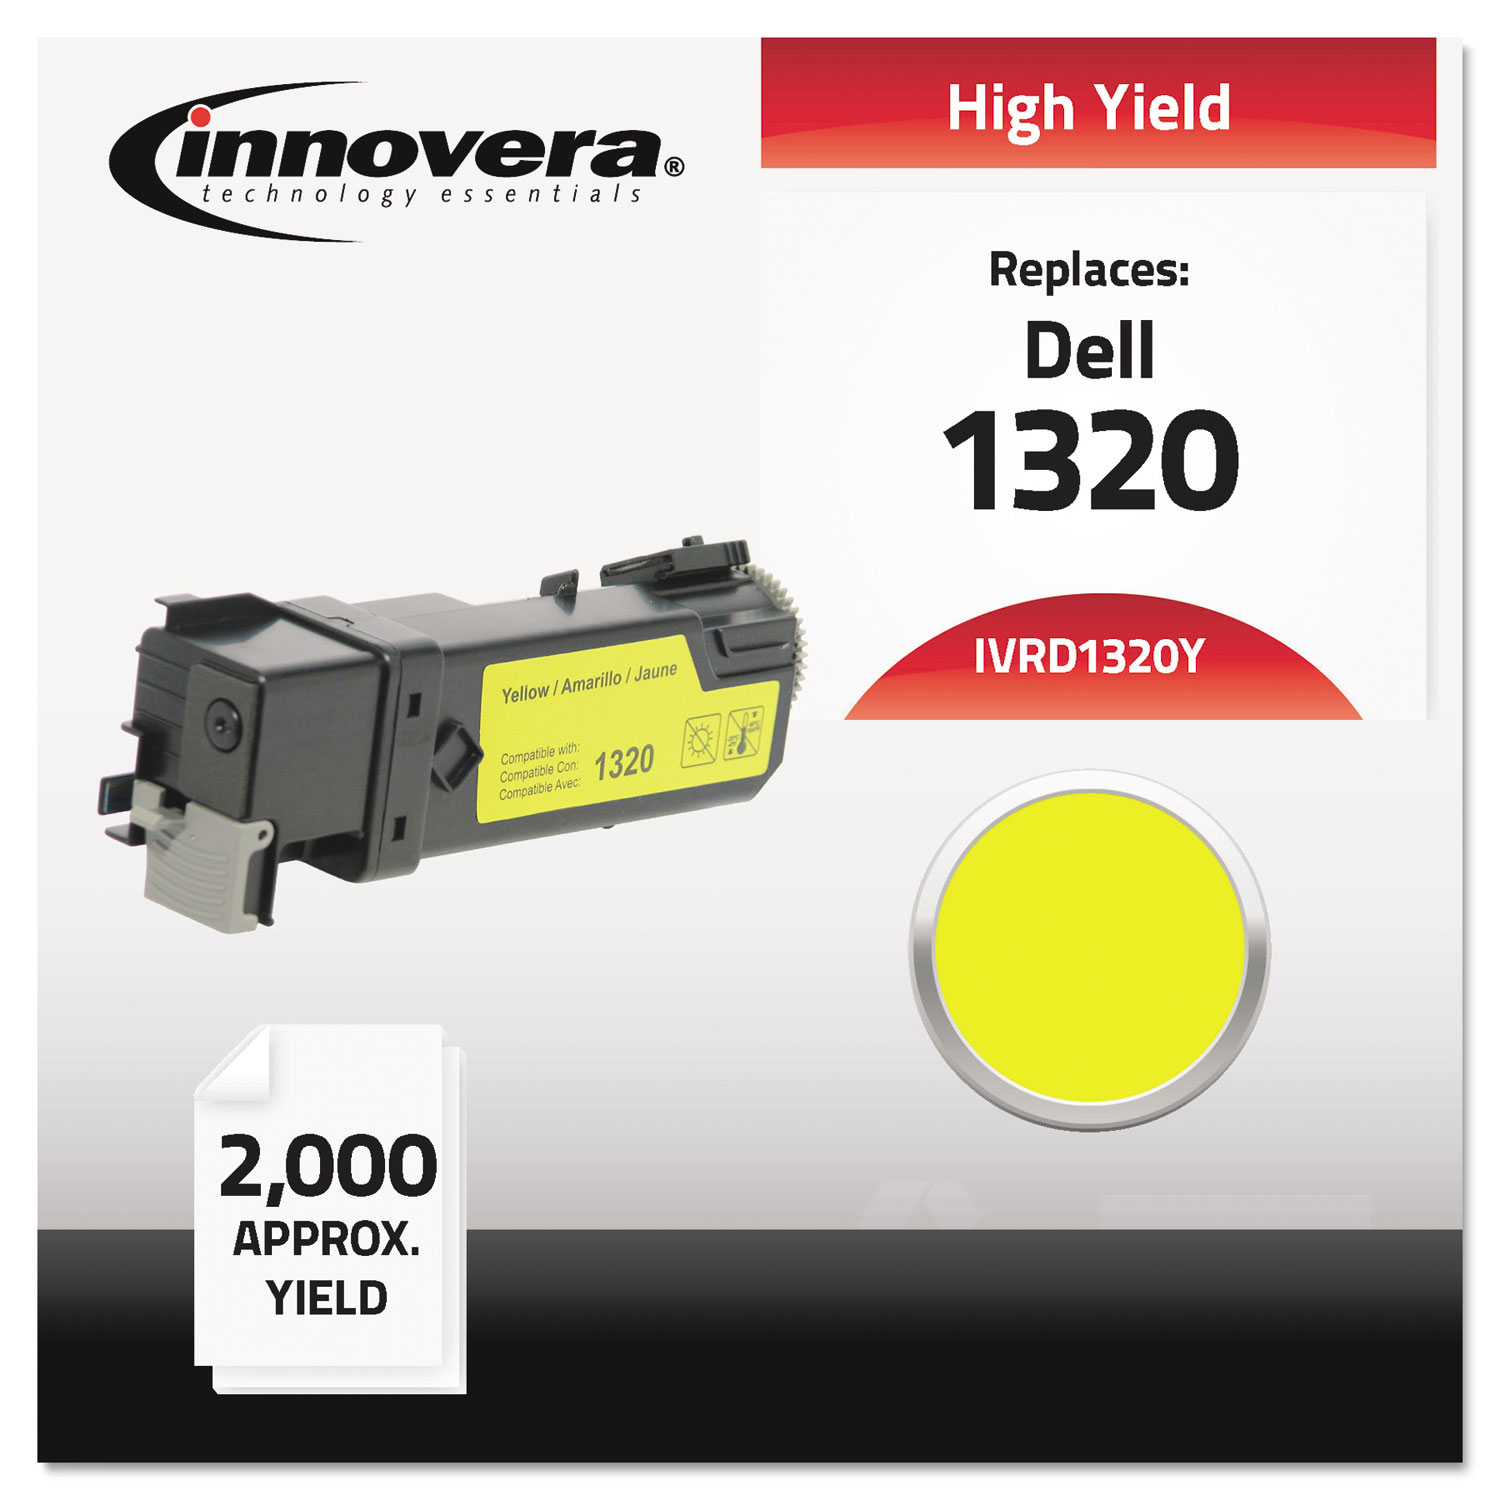 Remanufactured 310-9062 (1320) High-Yield Toner, Yellow